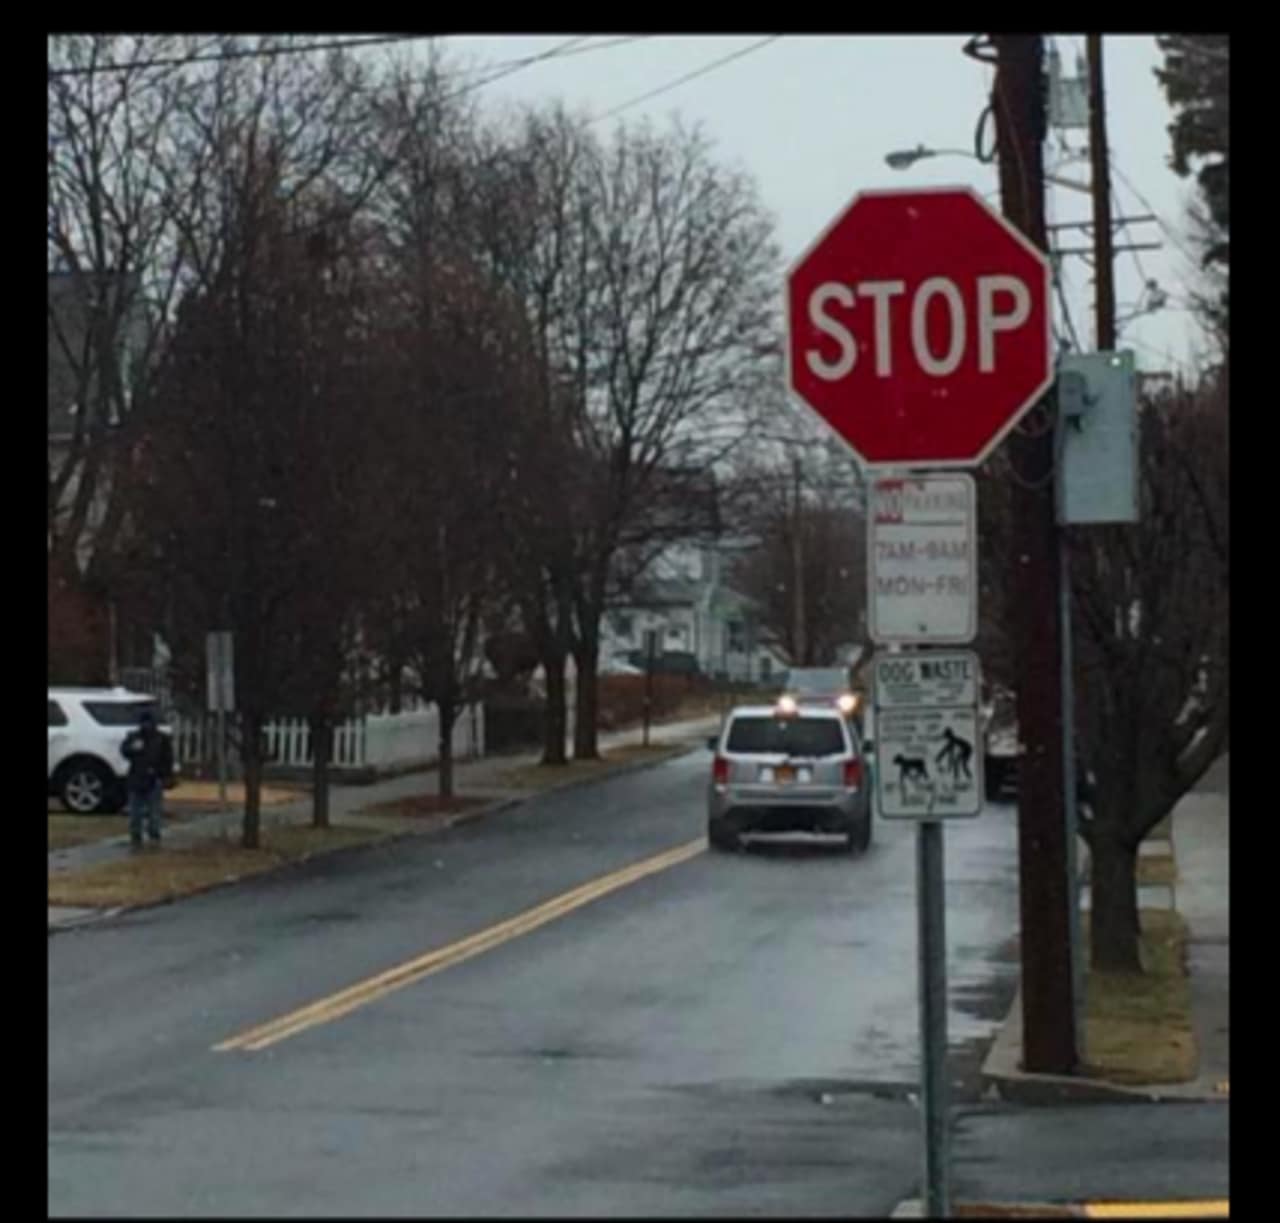 The village of Suffern installed two stop signs on Ramapo Avenue in the area of West Maltbie Avenue.